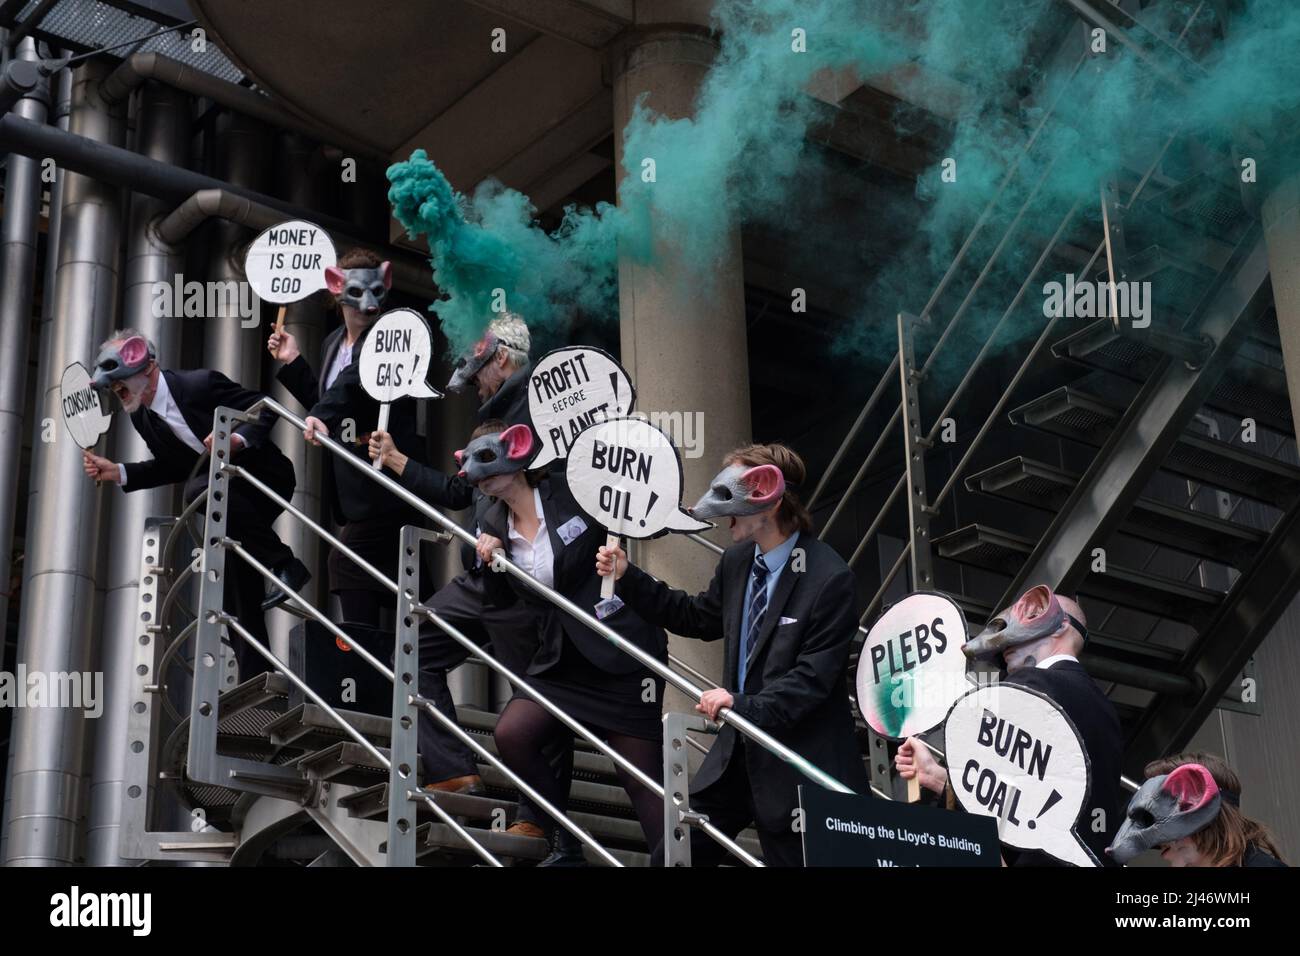 London, UK. 12th Apr, 2022. 40 Extinction Rebellion (XR) activists blocked all entrances to Lloyds of London, shutting the building for the day. Lloyd's of London insures 40% of the world's coal, oil and gas projects. XR is demanding they stop insuring fossil fuels. Today was part of a week long wave of protests and civil disobedience actions to demand an immediate stop to all new fossil fuel infrastructure by the British government amid the climate crisis and ecological emergency. Stock Photo